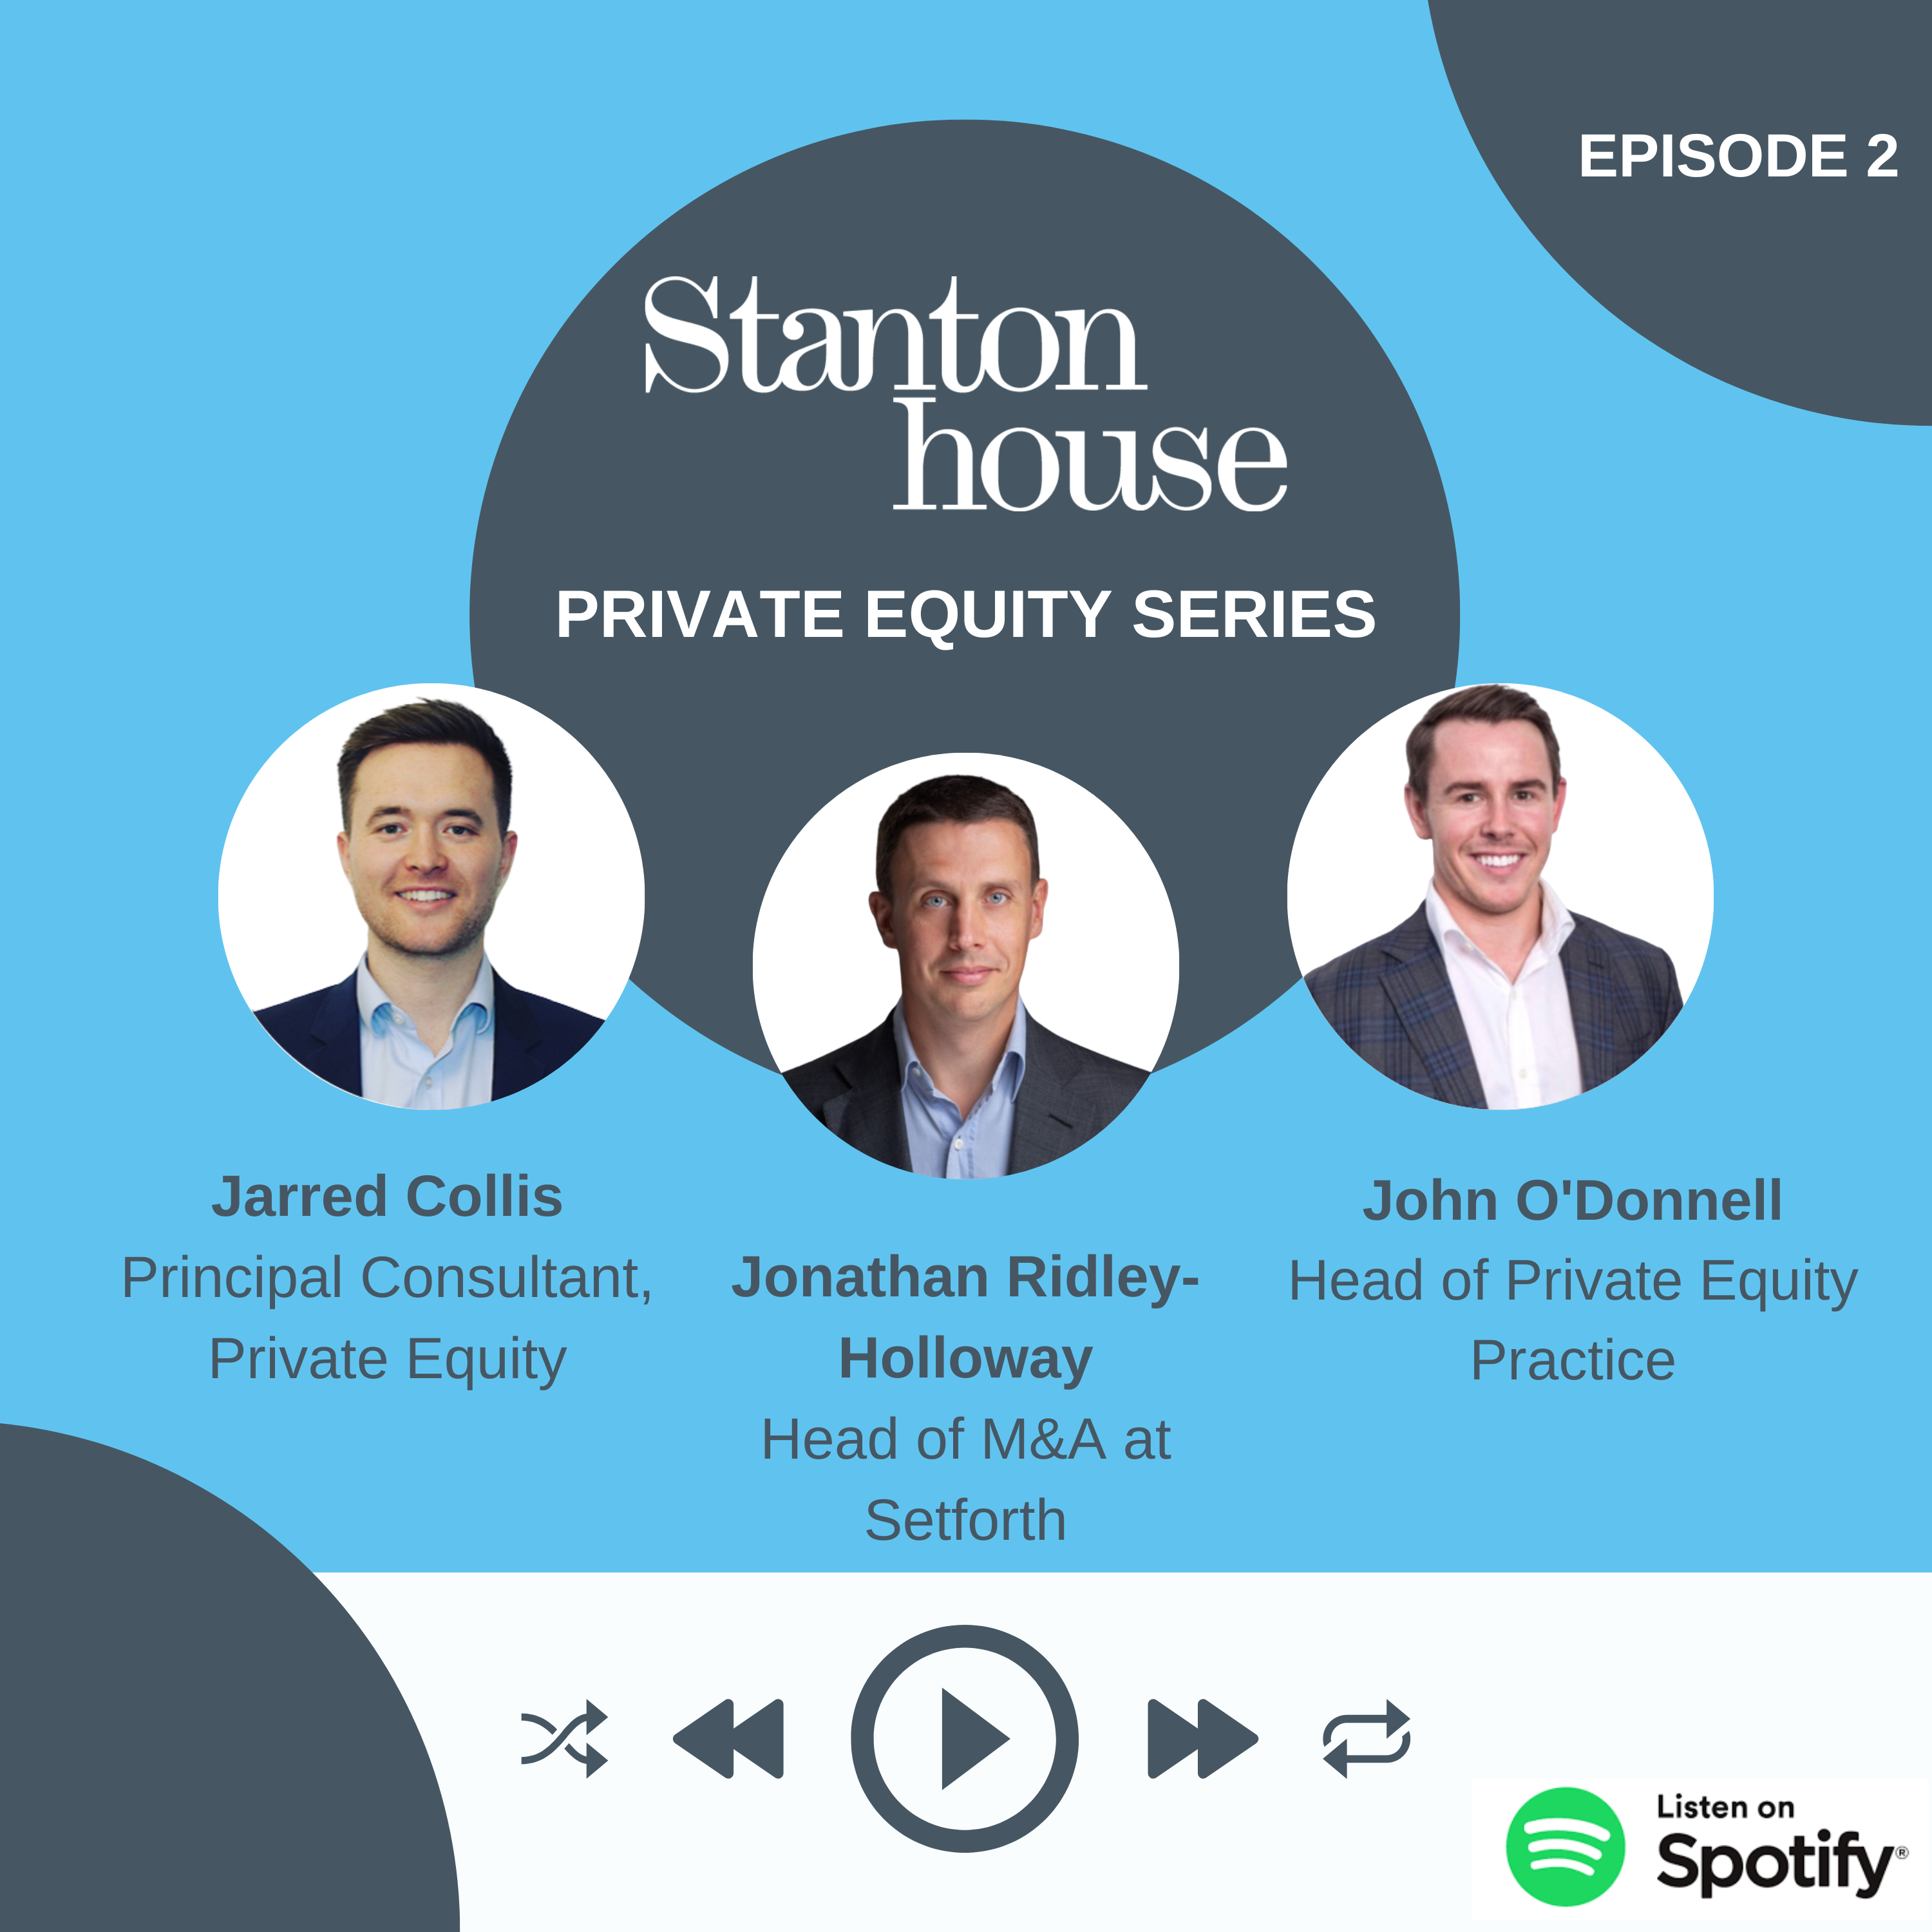 Jarred Collis Principal Consultant, Private Equity. Jonathan Ridley-Holloway Head of M&A at Setforth. John O'Donnell Head of Private Equity Practice. Stanton House Private Equity Series Episode 2